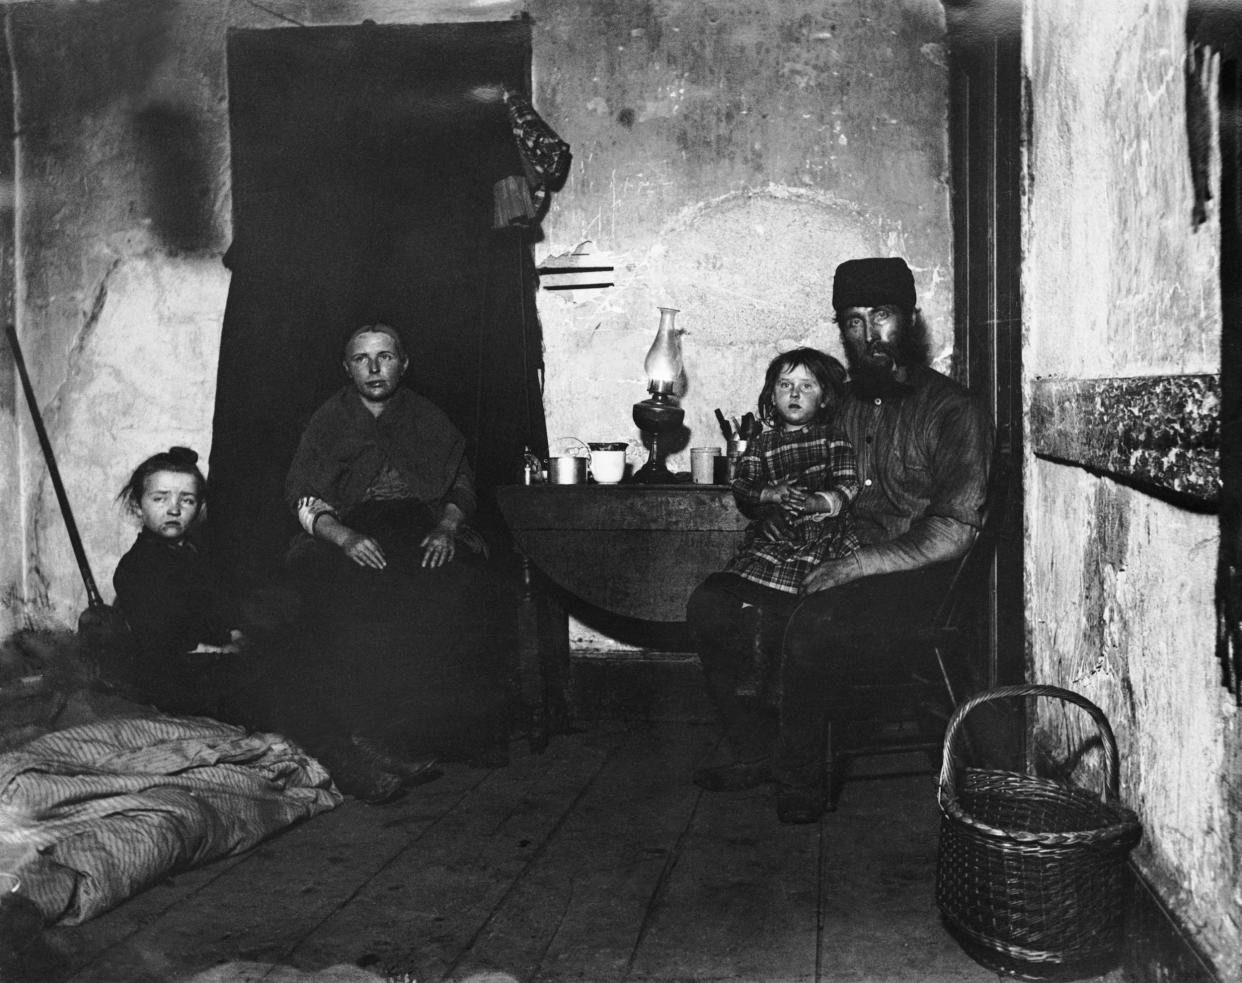 A poverty-stricken family living in New York’s Lower East Side, circa 1890.